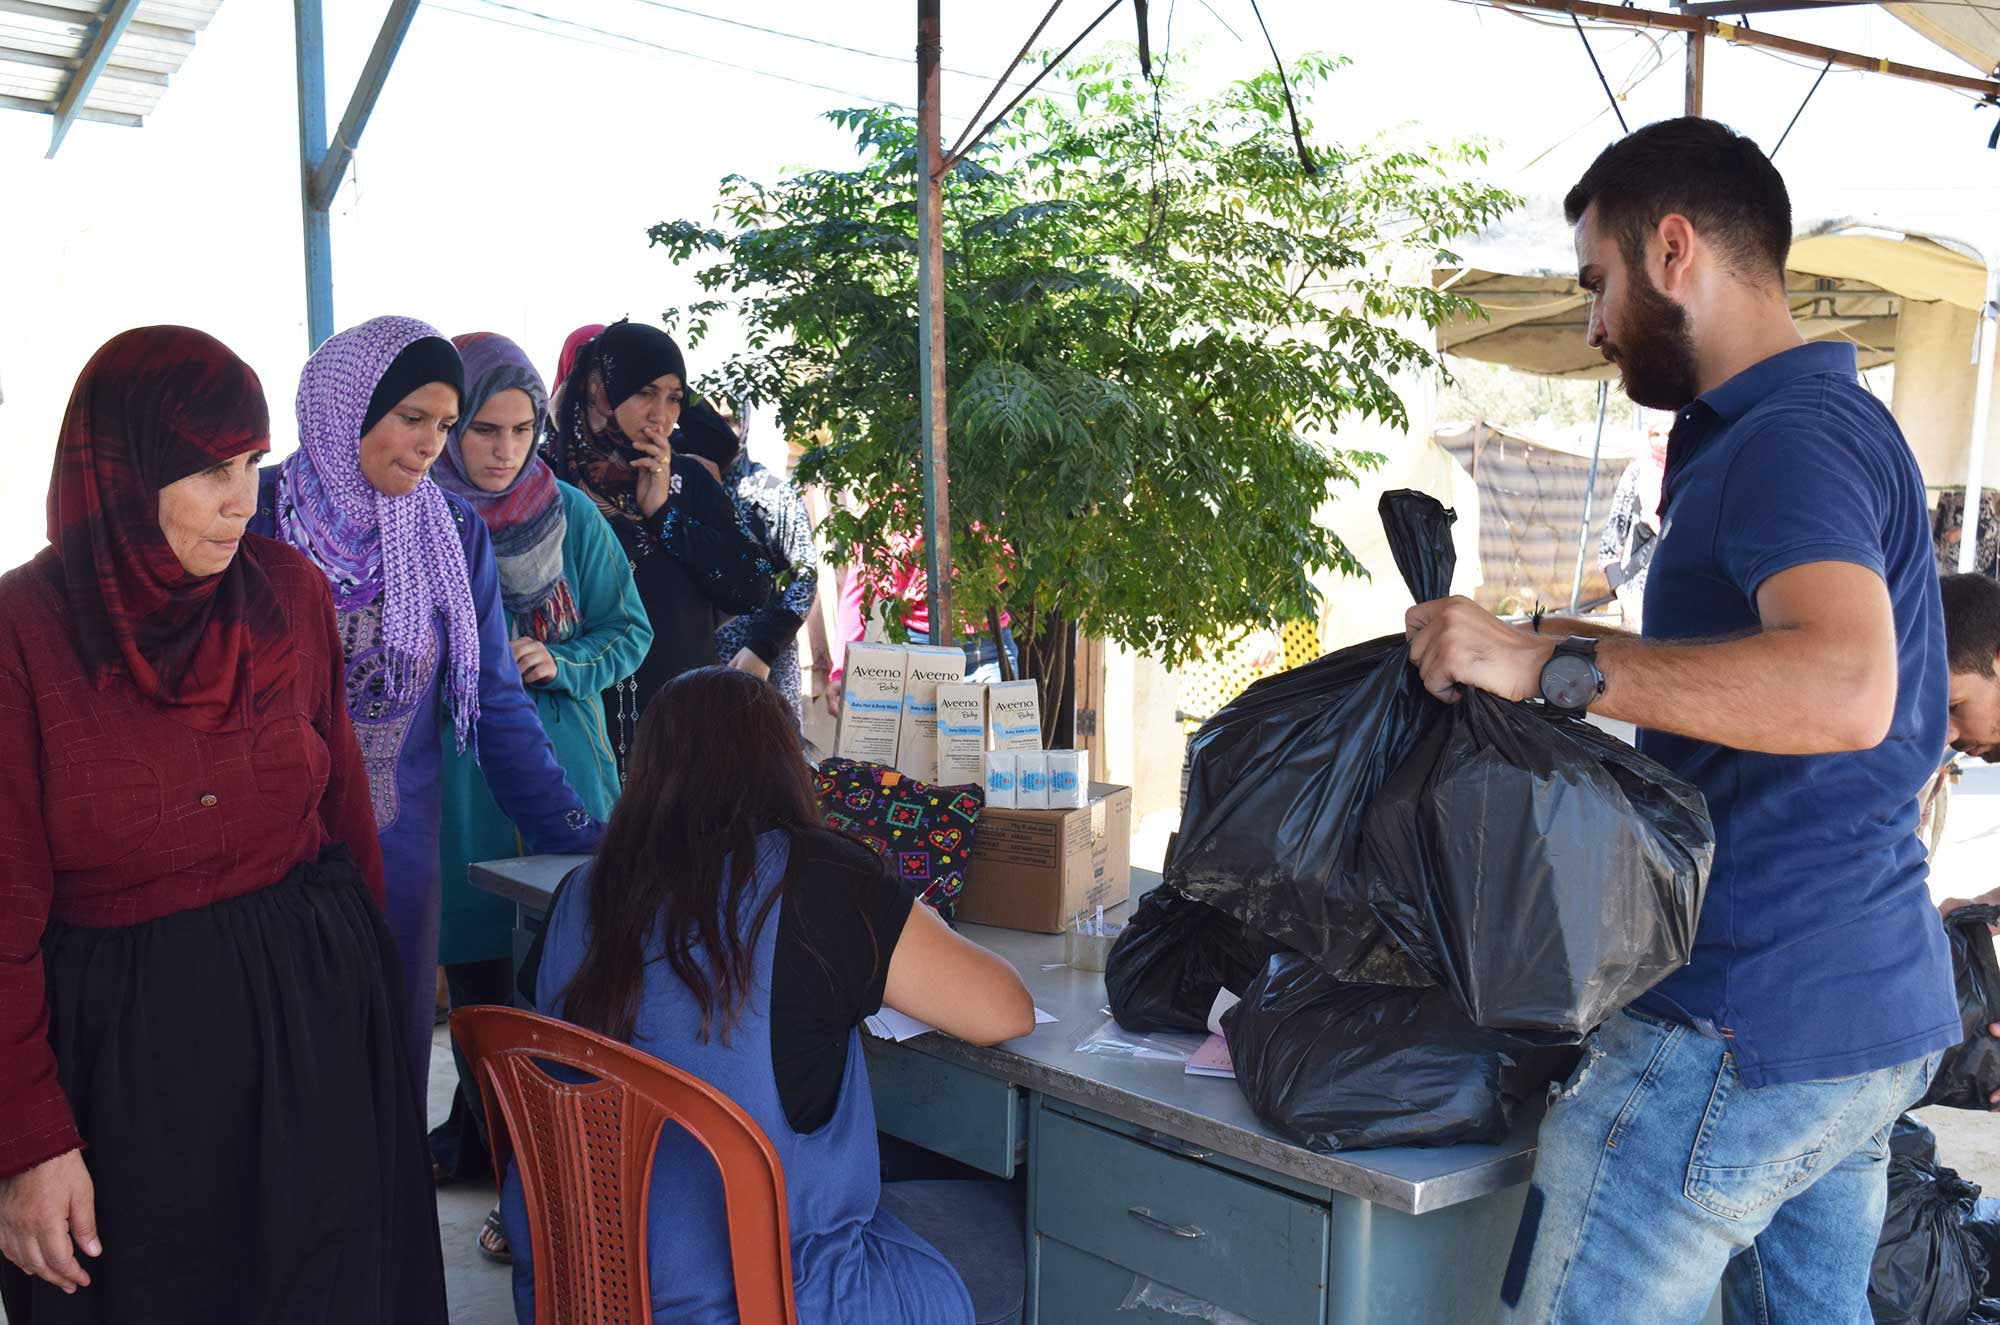 Hygiene kits were distributed to Syrian refugees in northern Lebanon.